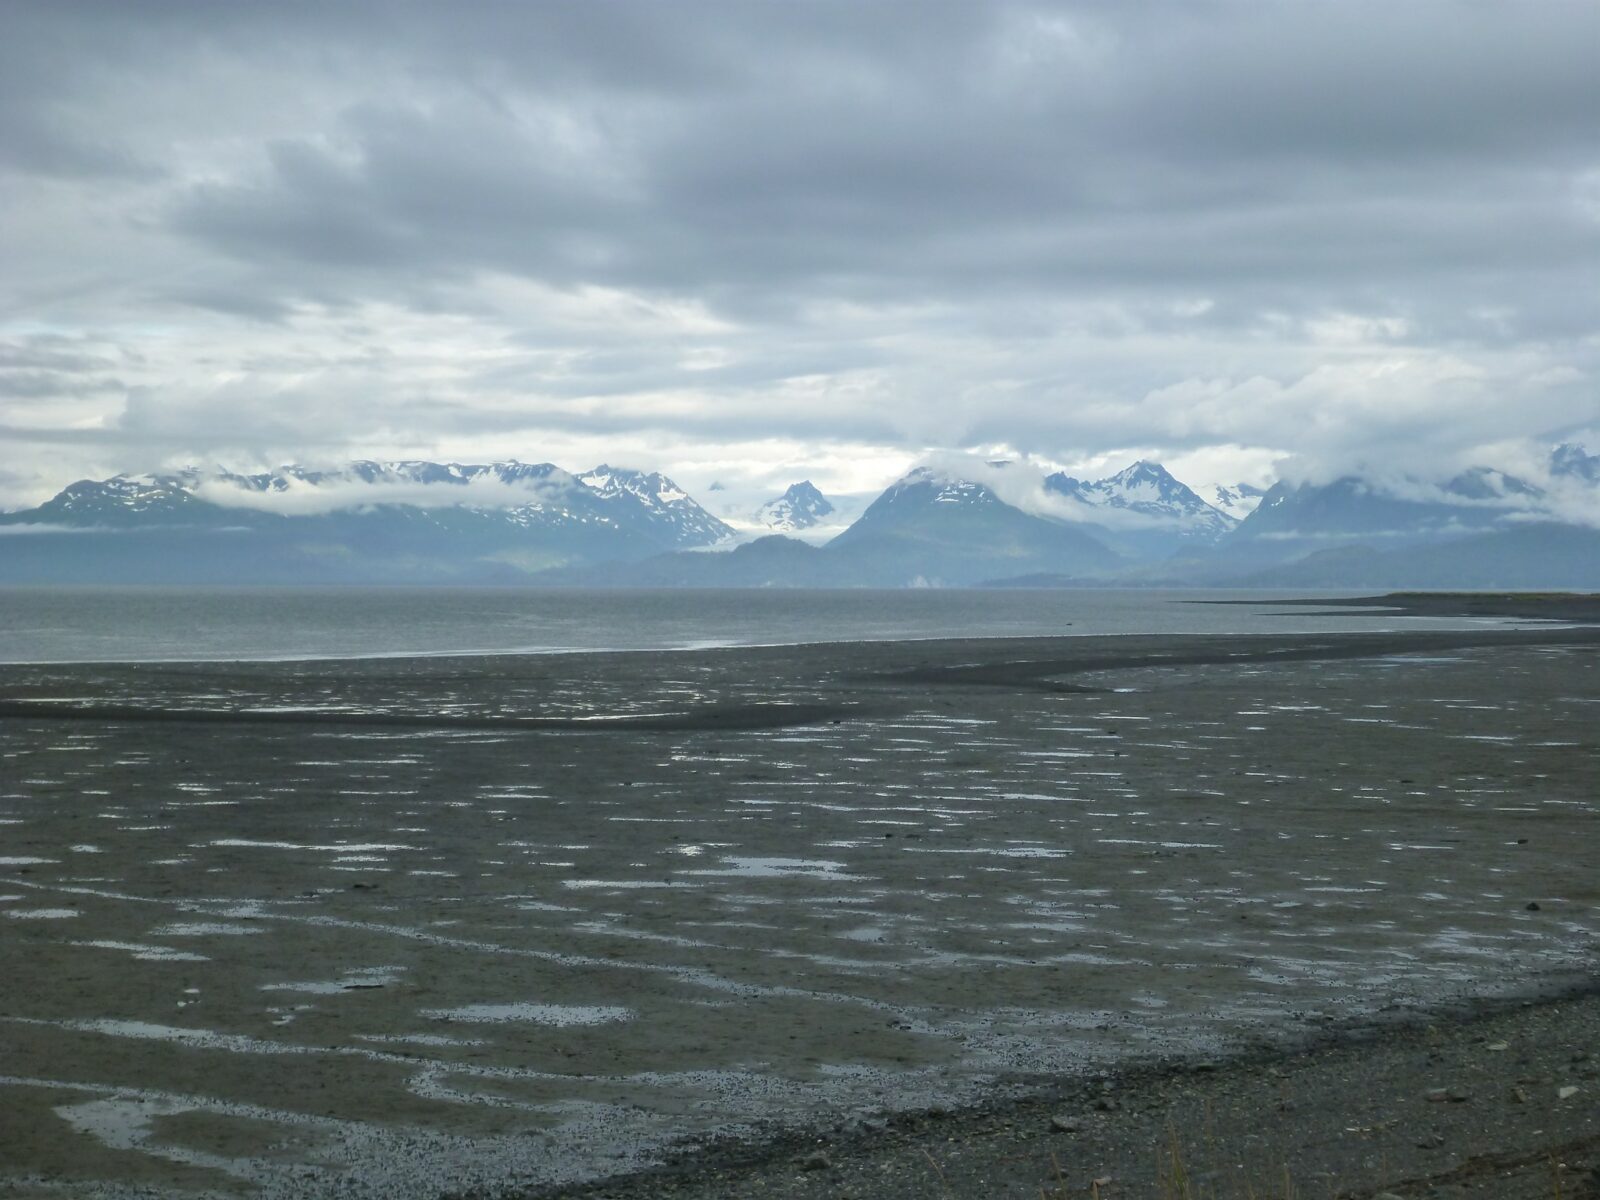 Low tide on the beach at gravelly Homer Spit. In the distance is gray water and mountains with snow and fog surrounding them on an overcast day